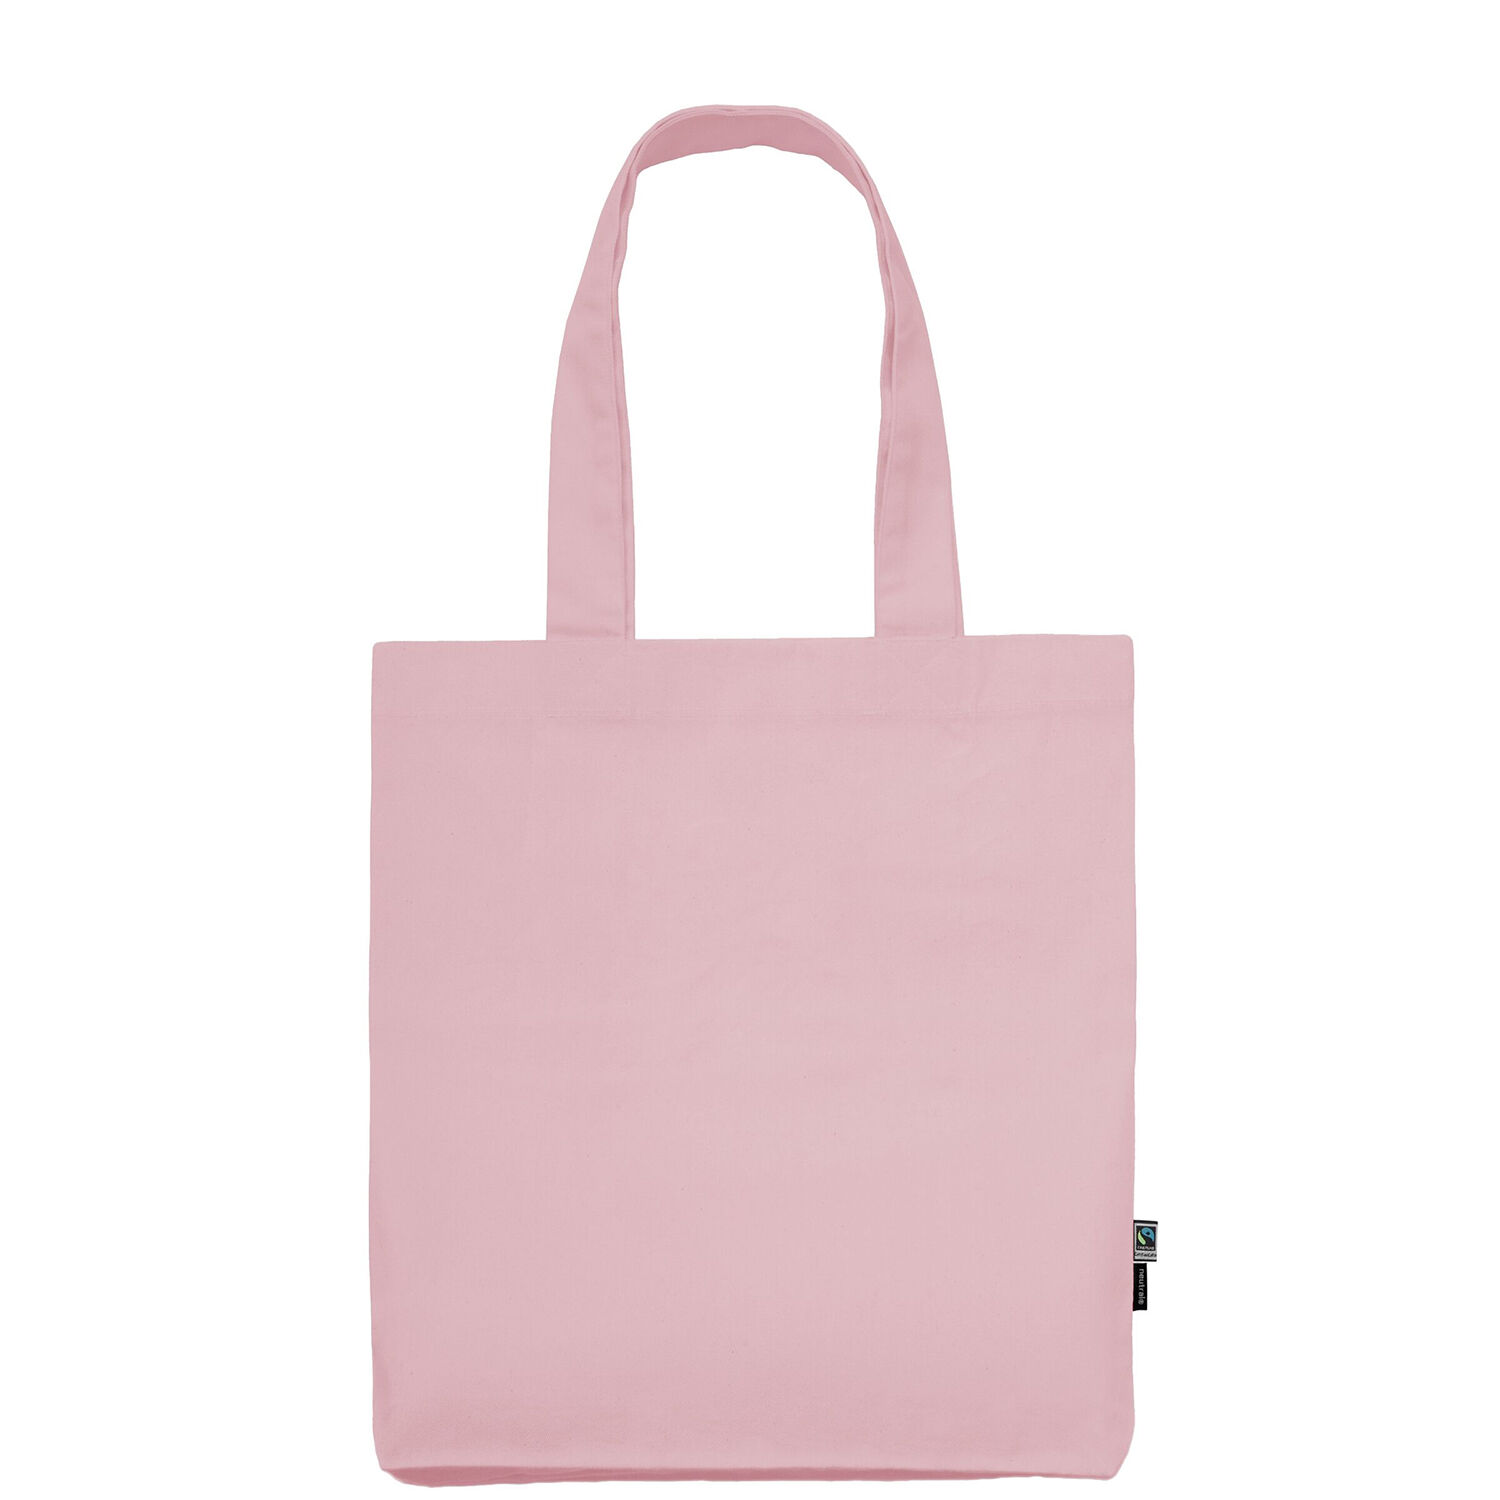 Neutral Brand Organic Twill Tote Bag in pink